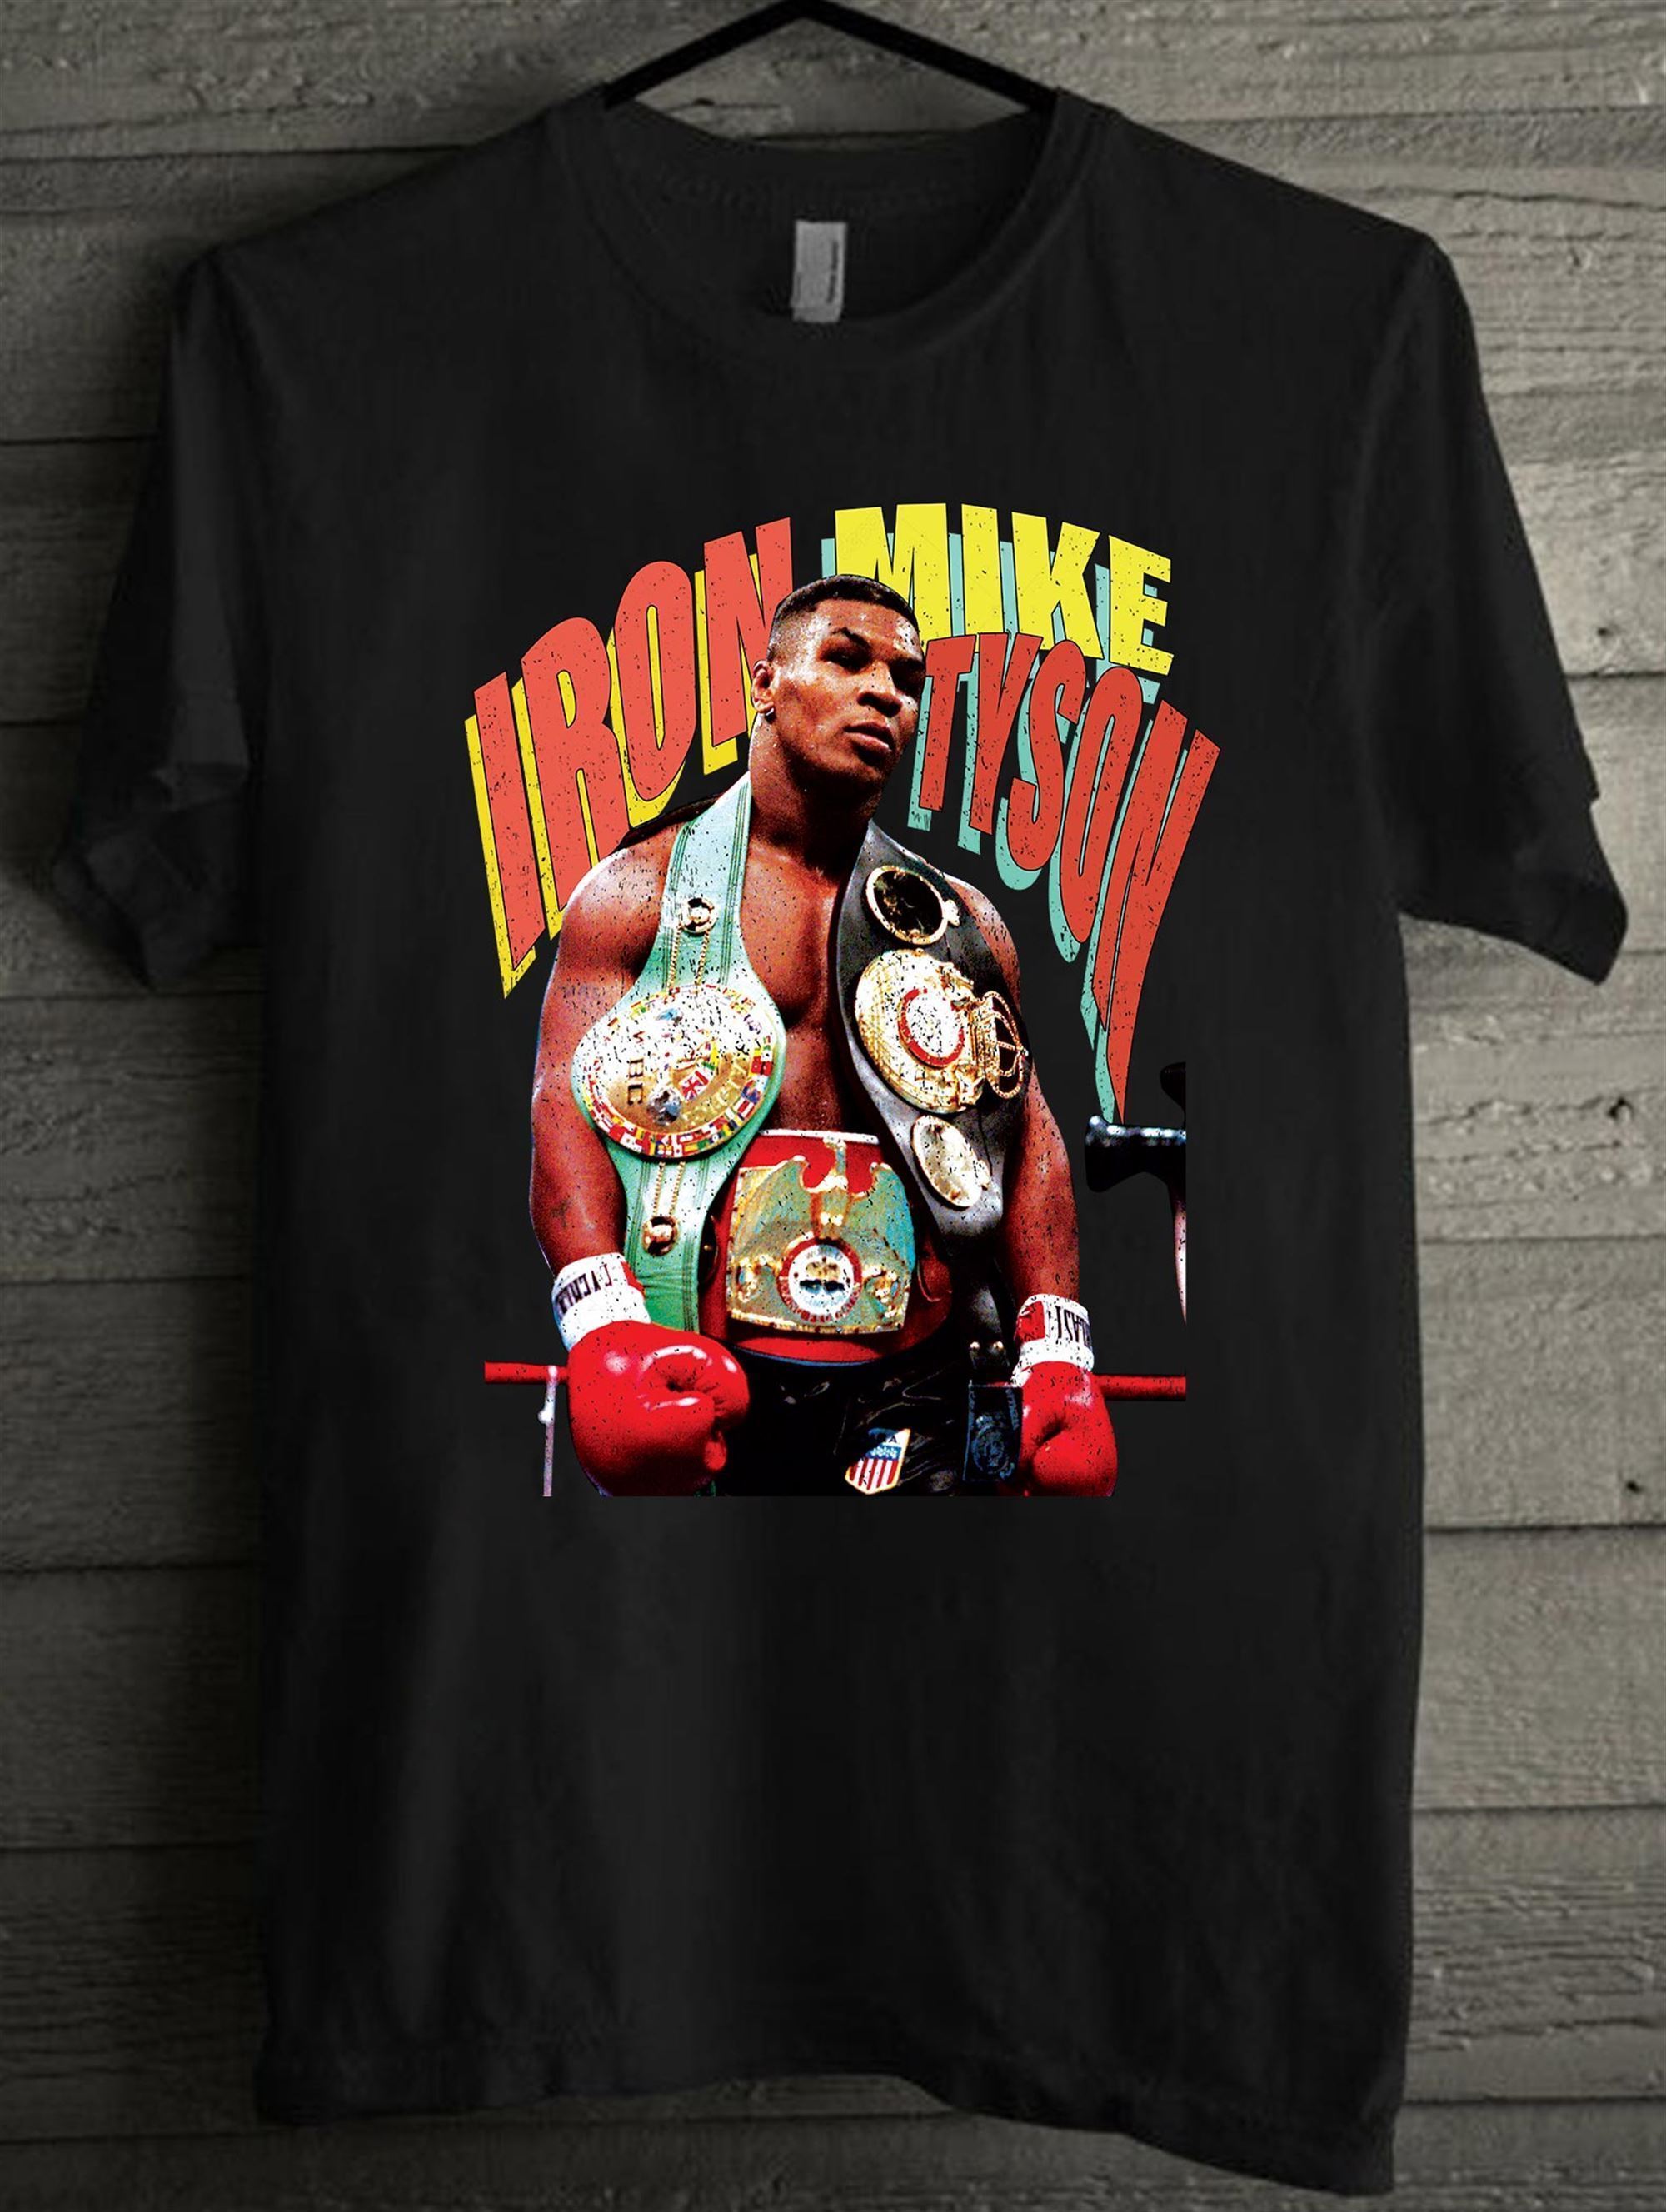 Iron Mike Tyson T-shirt Mike Tyson T Shirts Mike Tyson Vintage Tee Mike Tyson Retro Inspired T Shirt